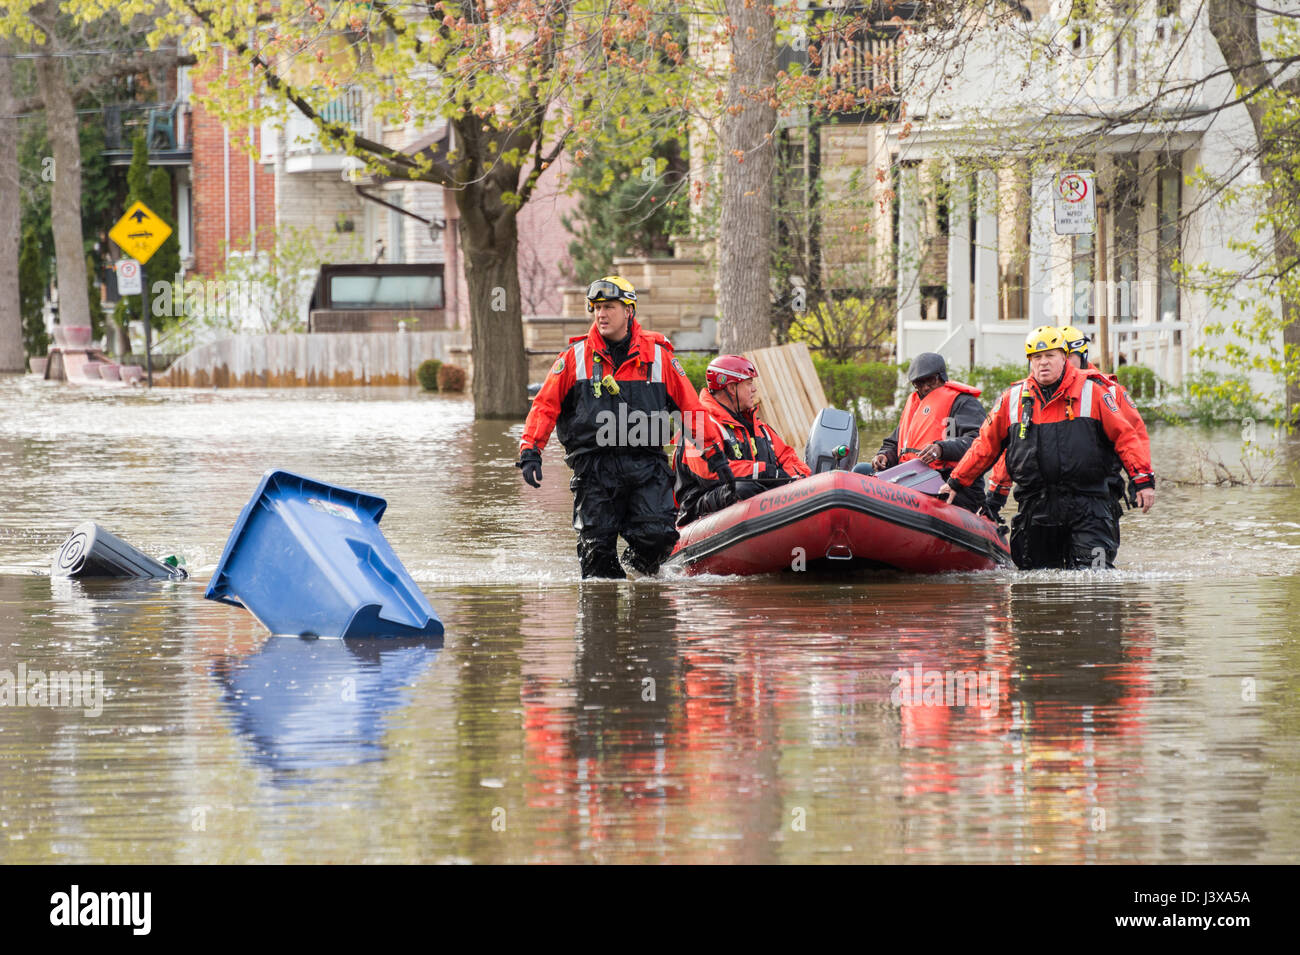 Montreal, Canada. 8th May, 2017. Firemen use an inflatable boat to help residents as flooding hits Cousineau street Credit: Marc Bruxelle/Alamy Live News Stock Photo